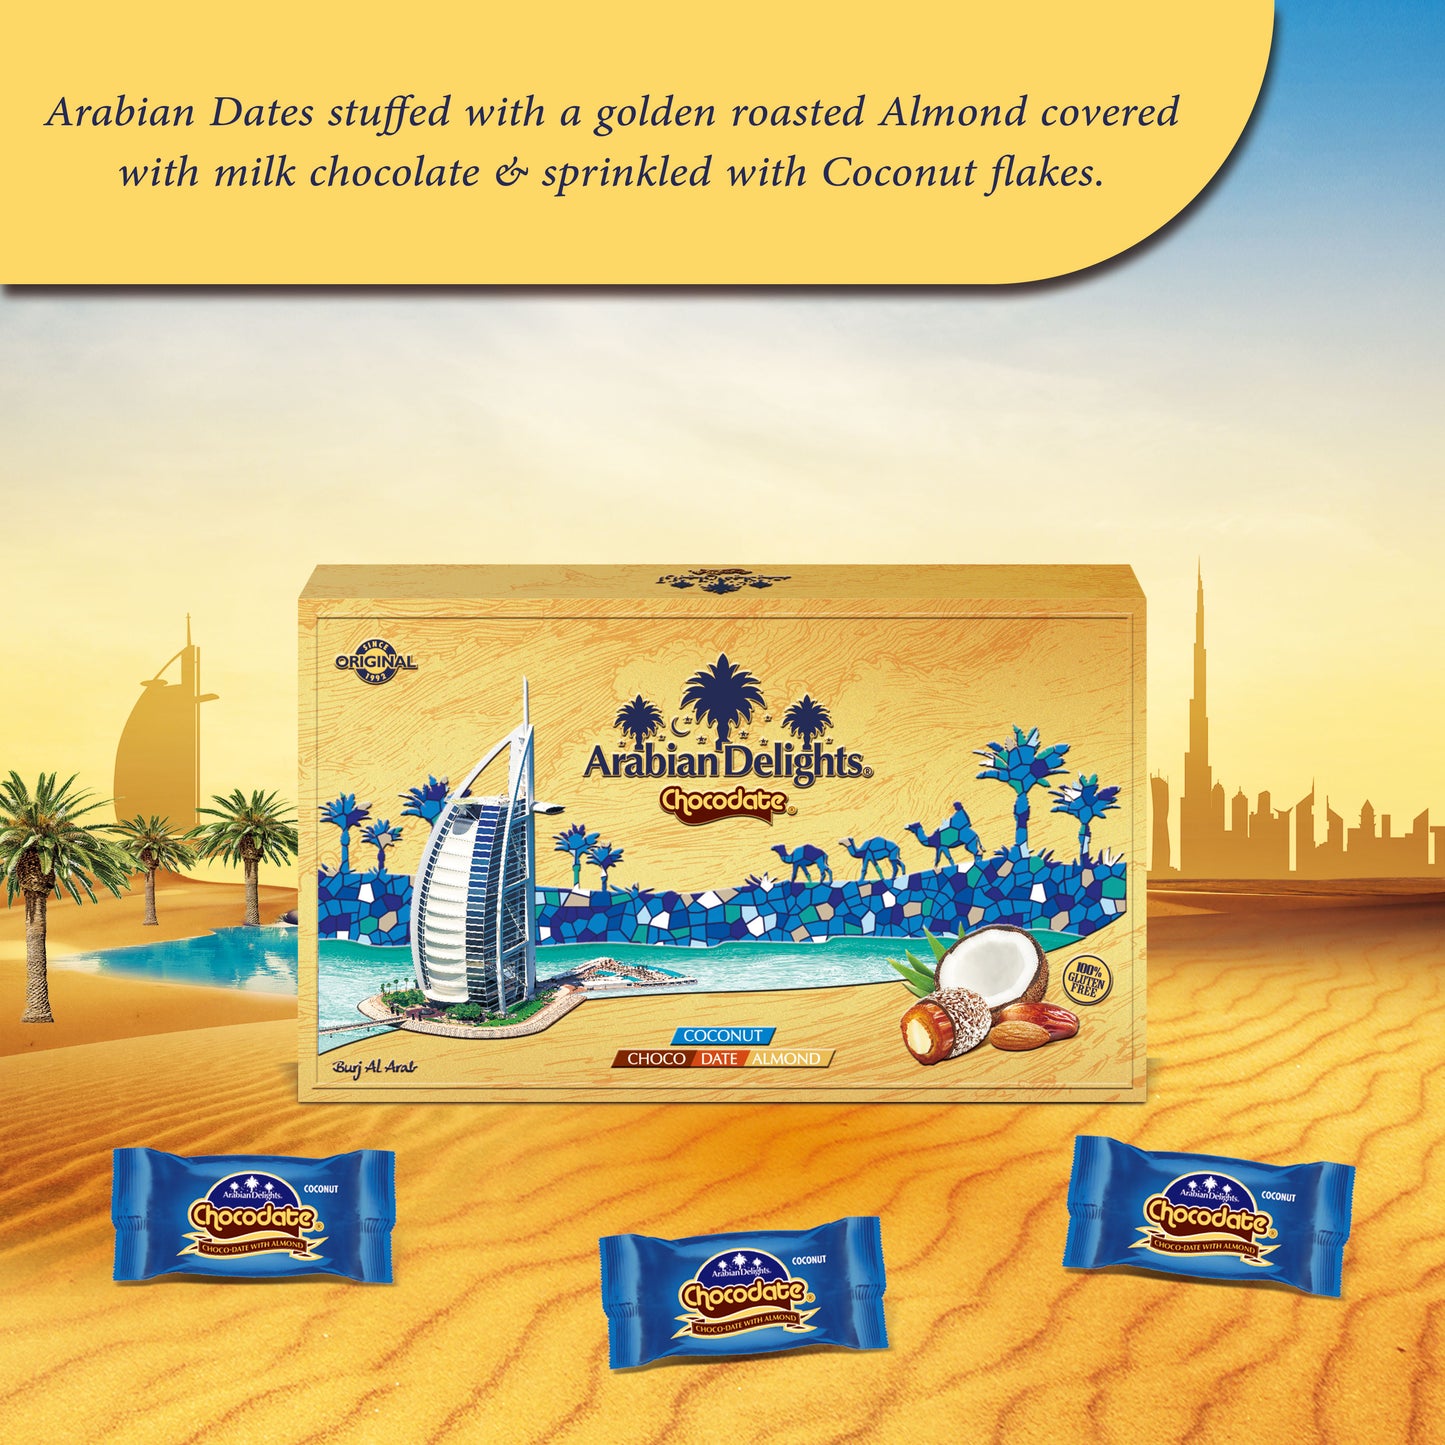 Arabian Delights Chocodate with Coconut, Chocolate Coated Bite-Sized Snacks, Stuffed w/ Golden Roasted Almonds, Dates | Snacks & Sweets - 150 gm